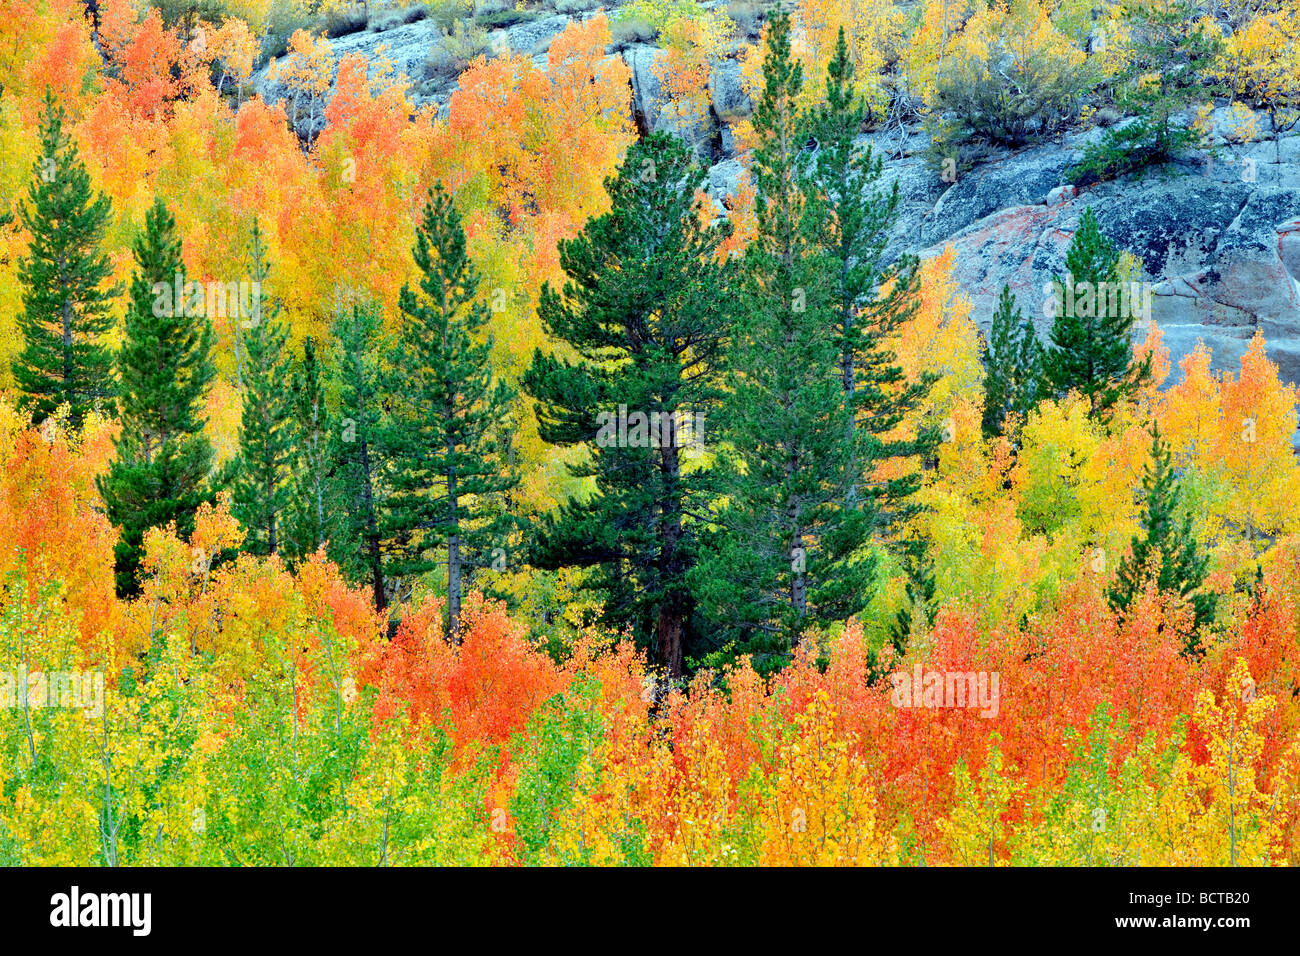 Mixed forest of aspens in fall colors and fir trees Inyo National Forest California Stock Photo